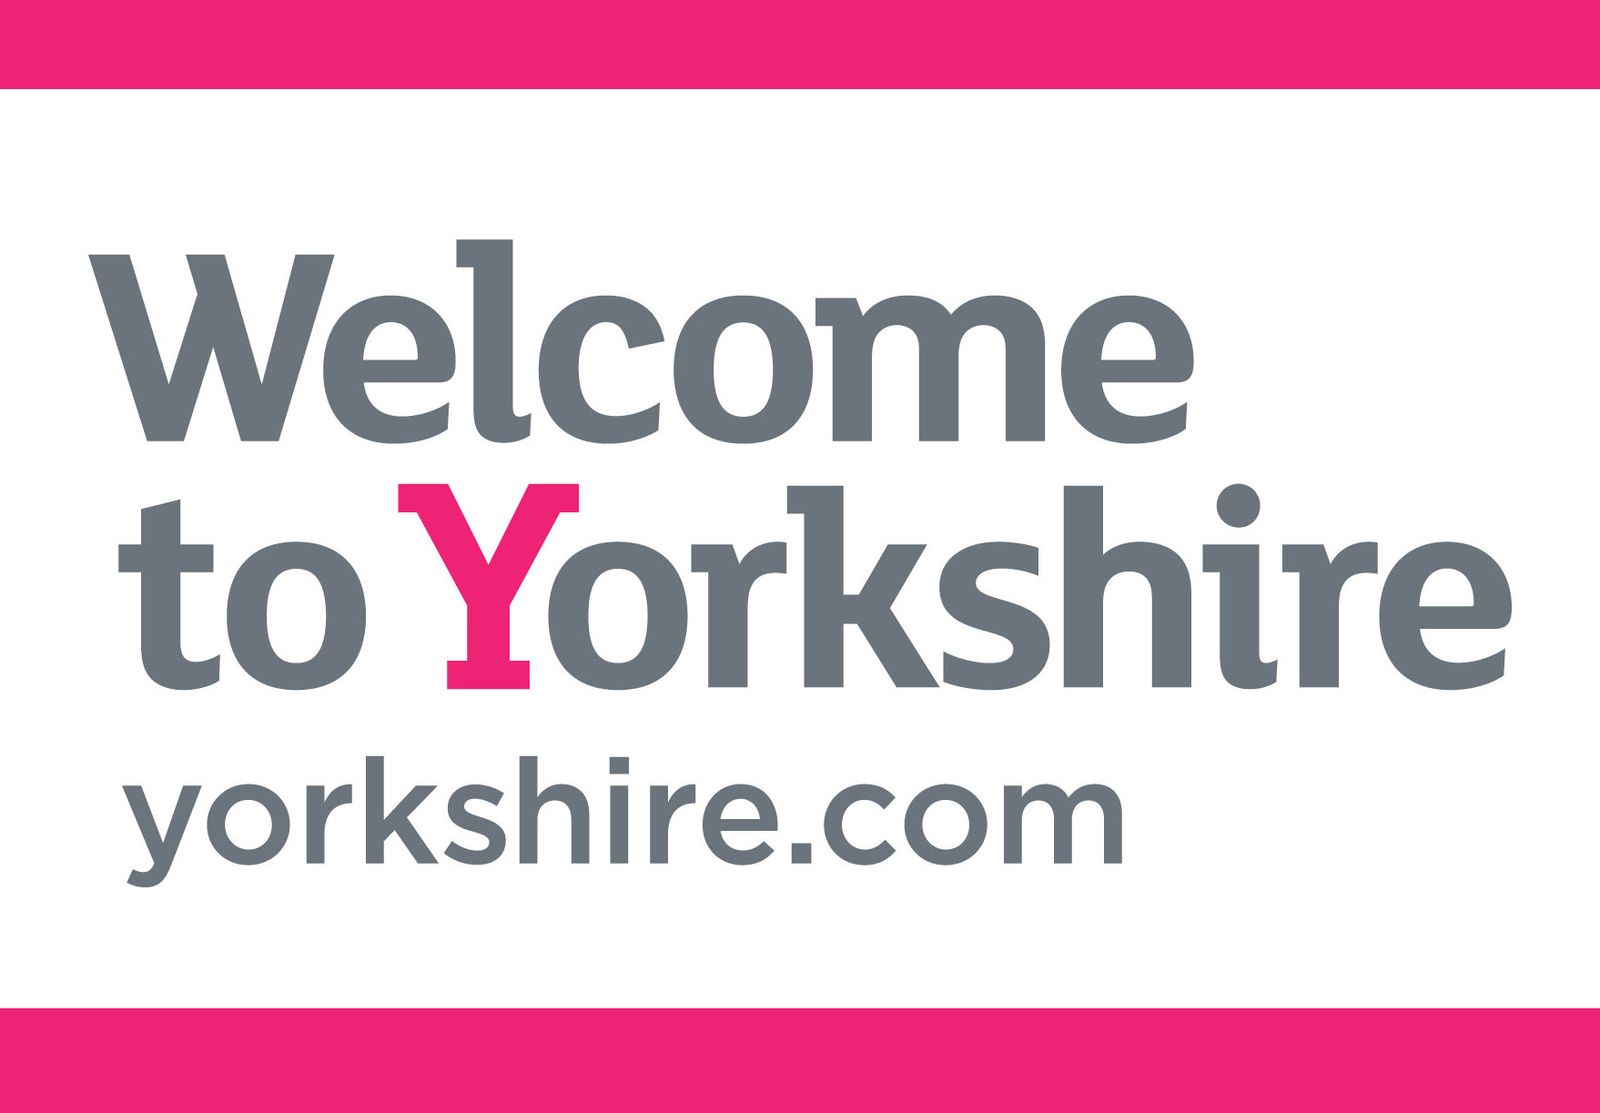 A statement on behalf of the Welcome to Yorkshire Board of Directors